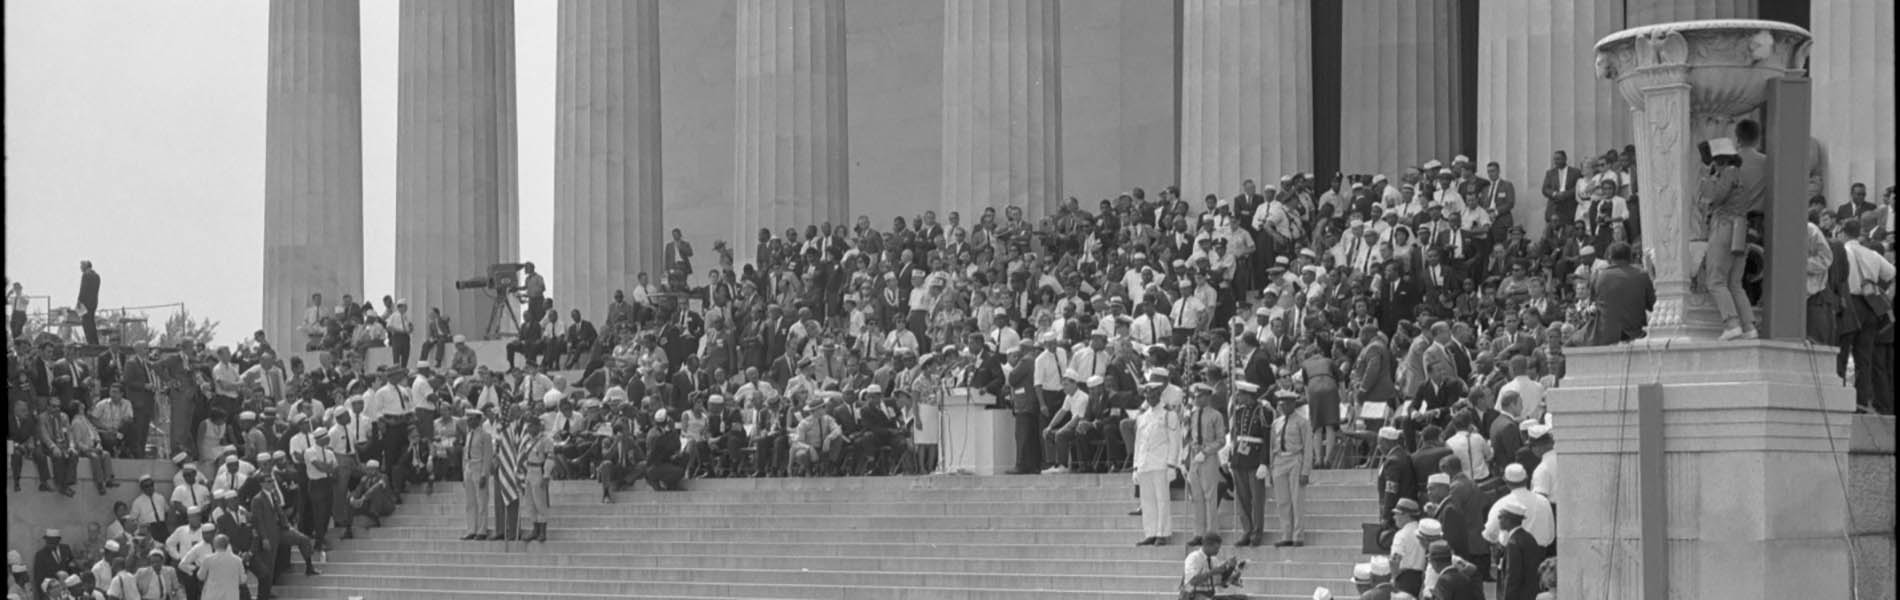 Black and white photo of crowd gathered for public address on steps of neoclassical building